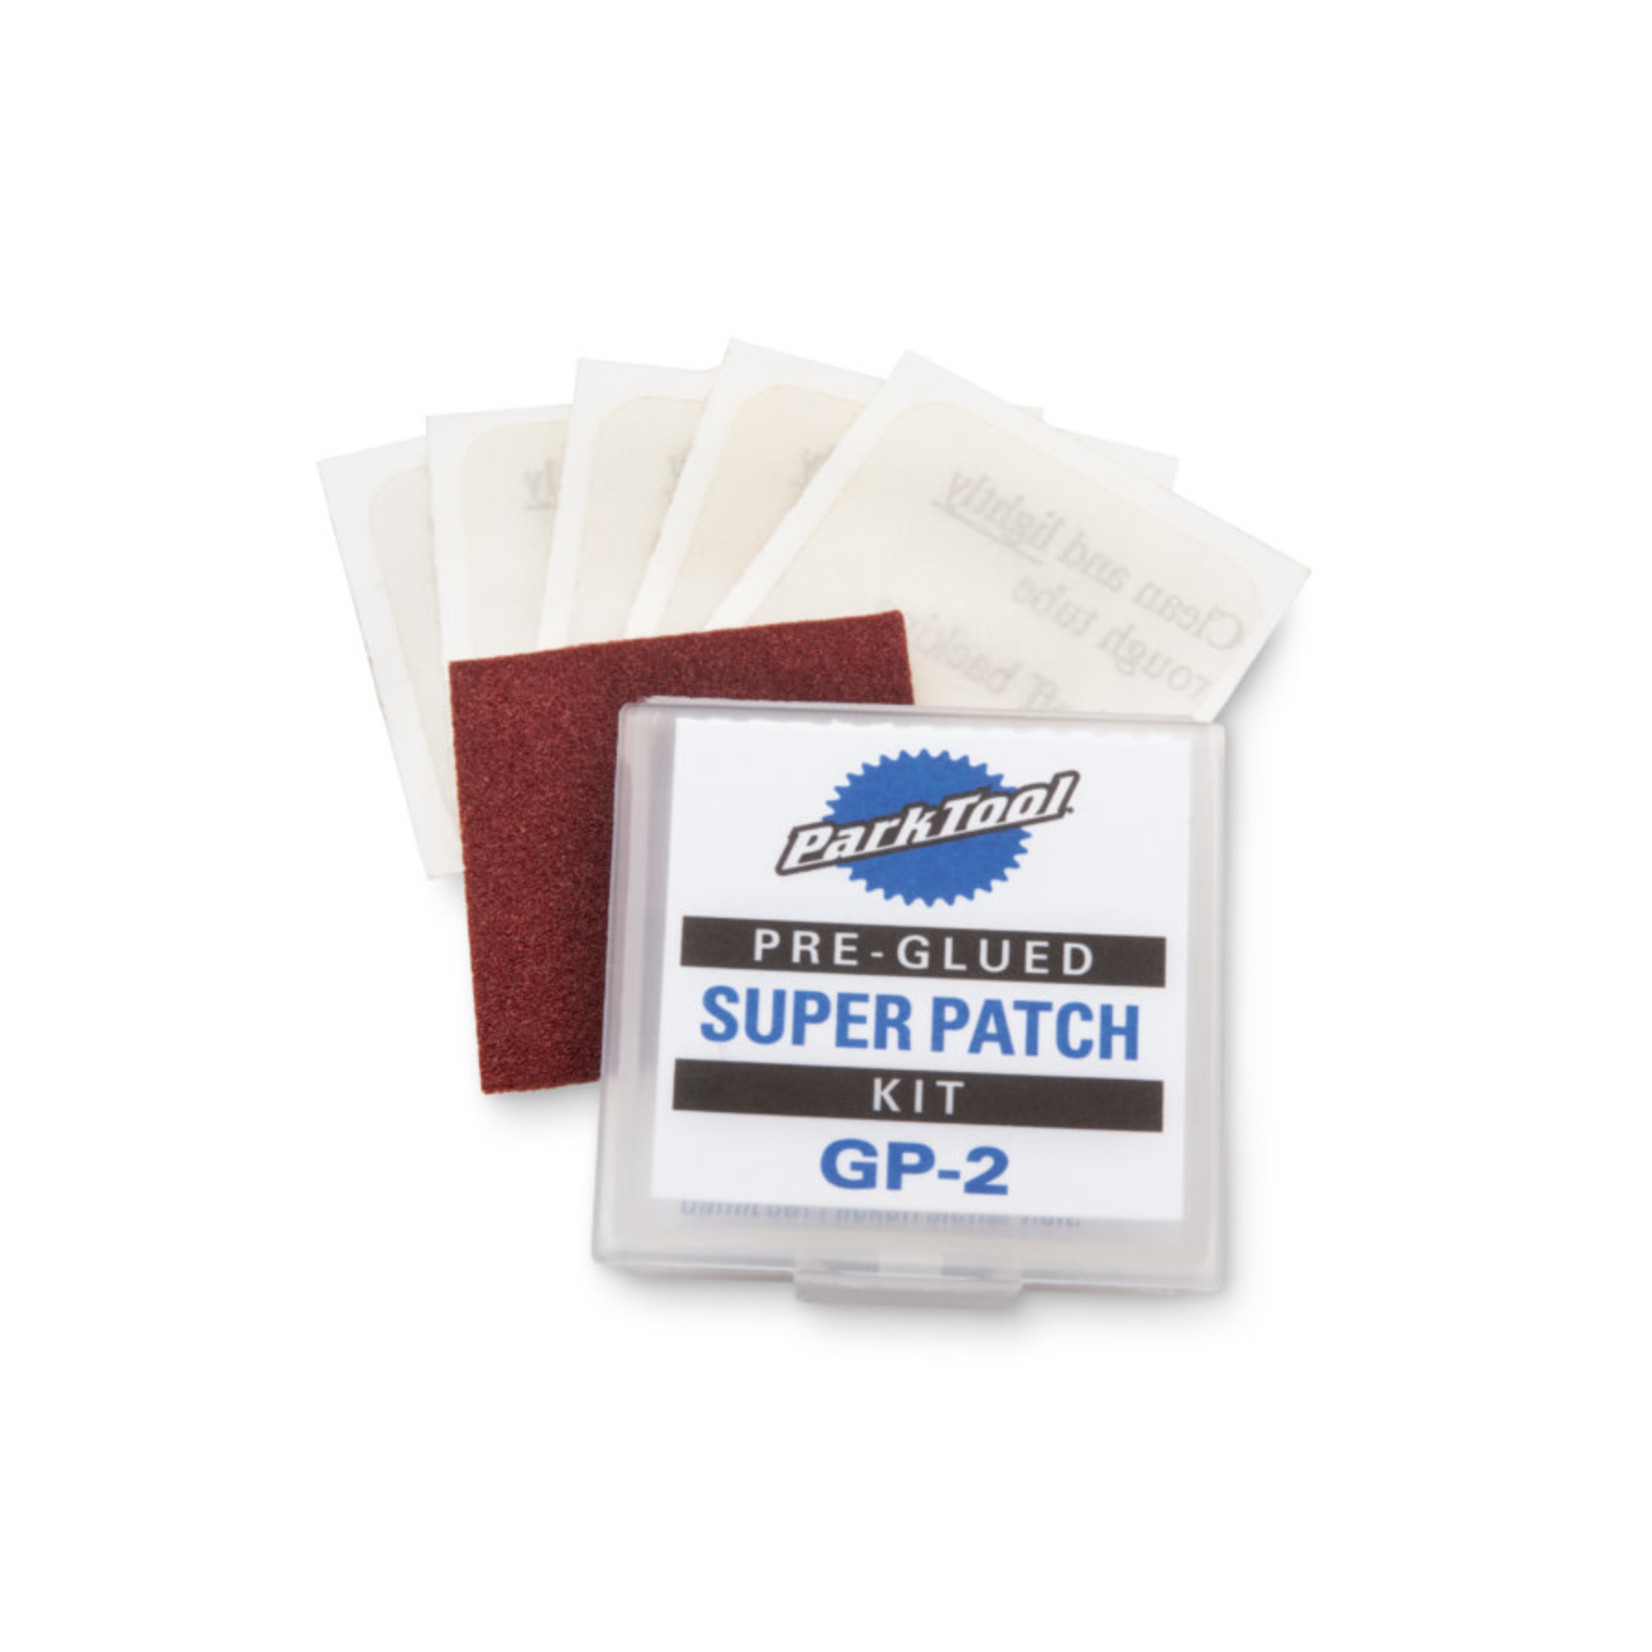 PARK TOOL Park Tool, GP-2, Kit of 6 pre-glued patches